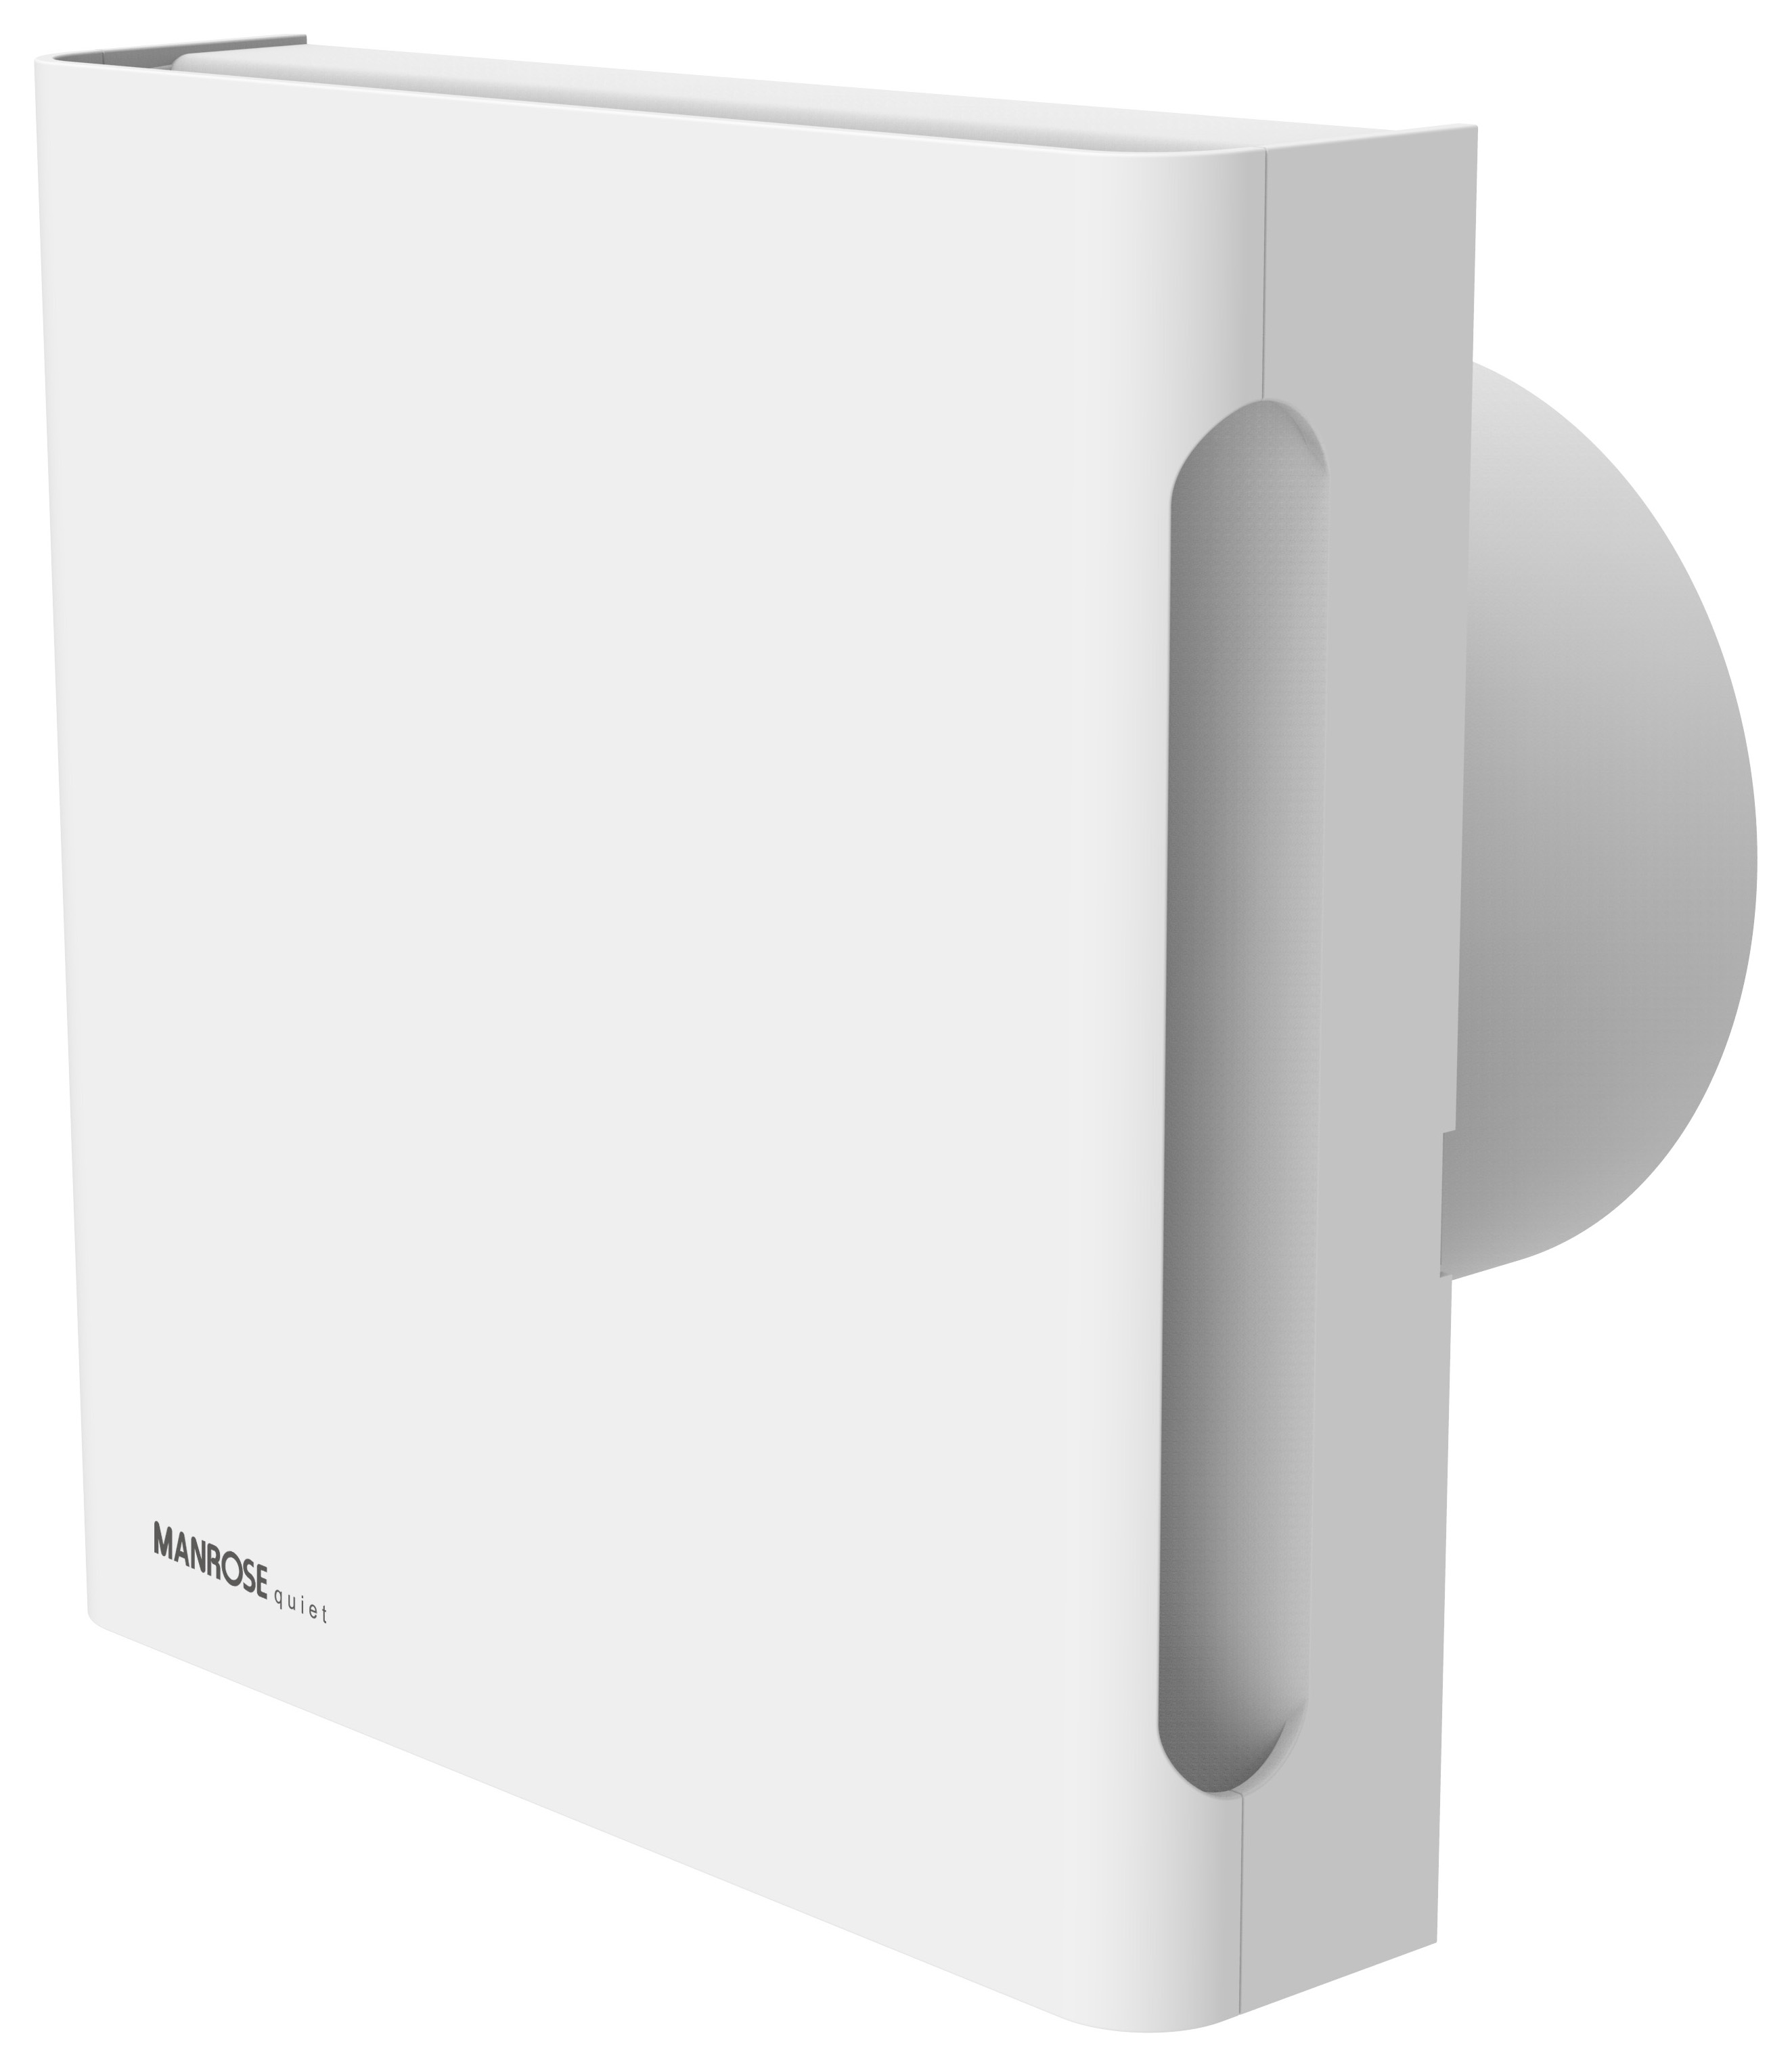 Image of Manrose IPX5 Quiet Bathroom Fan with Timer